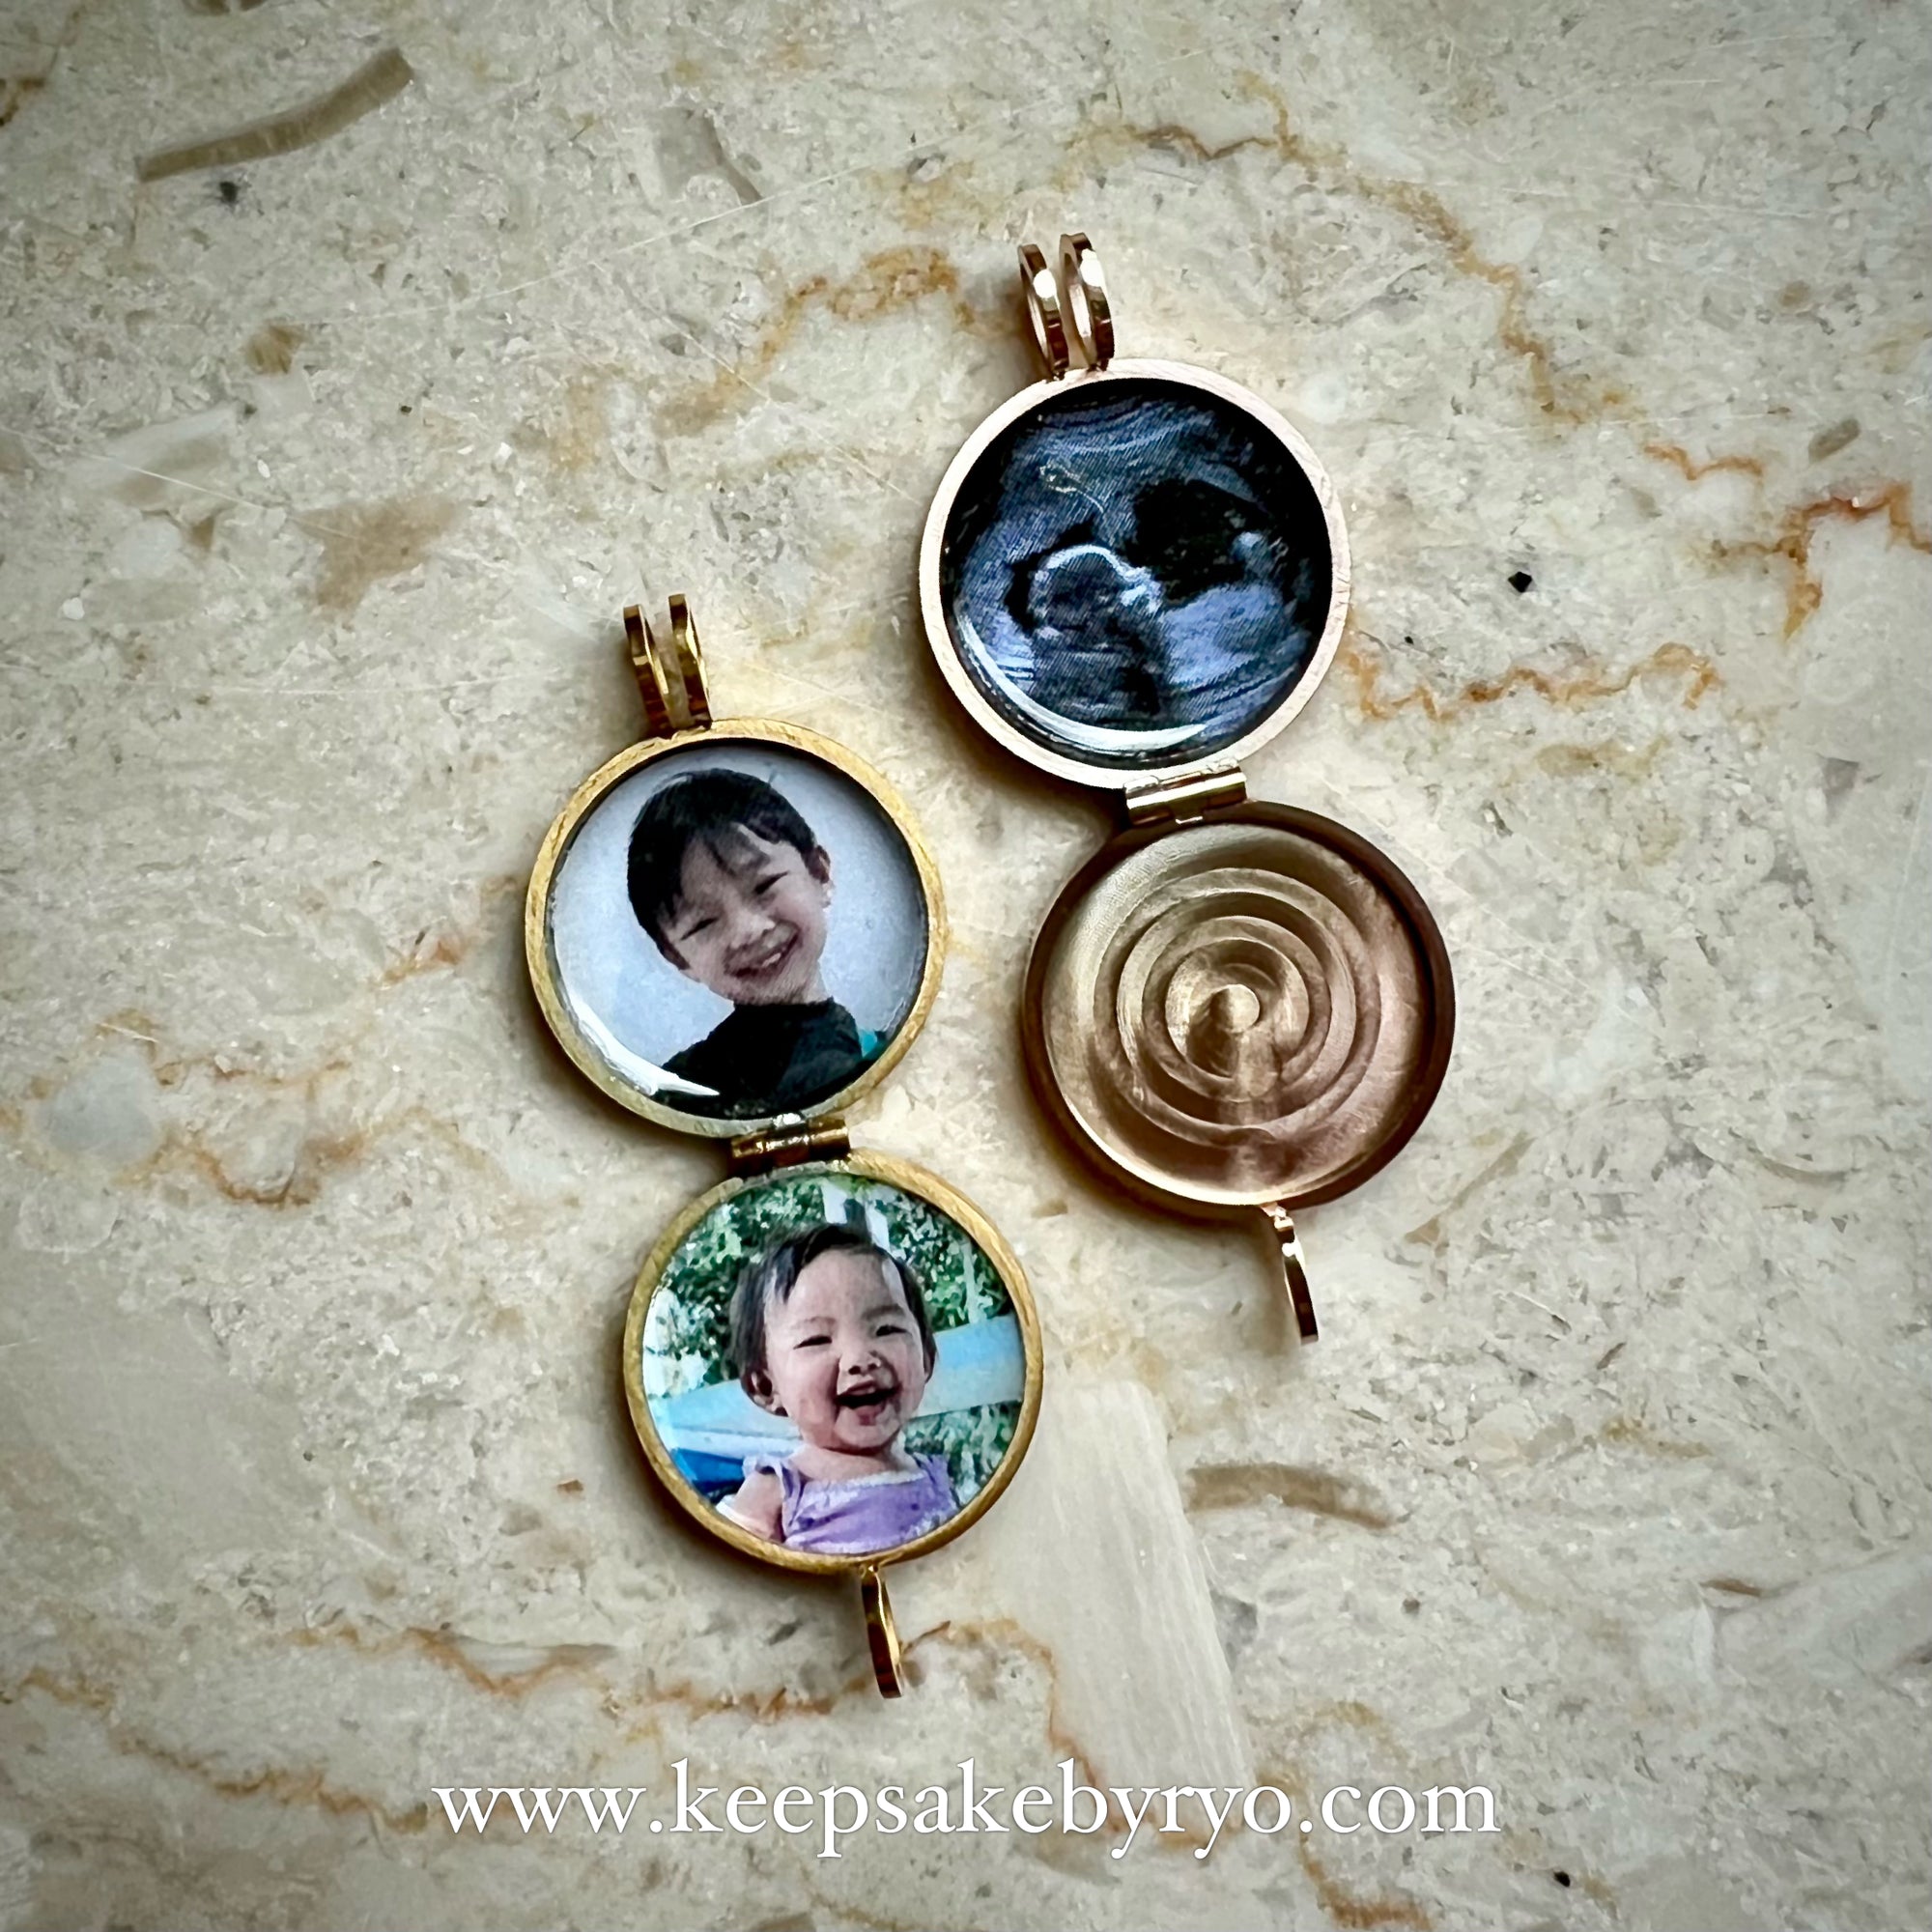 INCLUSION PHOTO LOCKET: BREASTMILK WITH HAIRCURL HEART